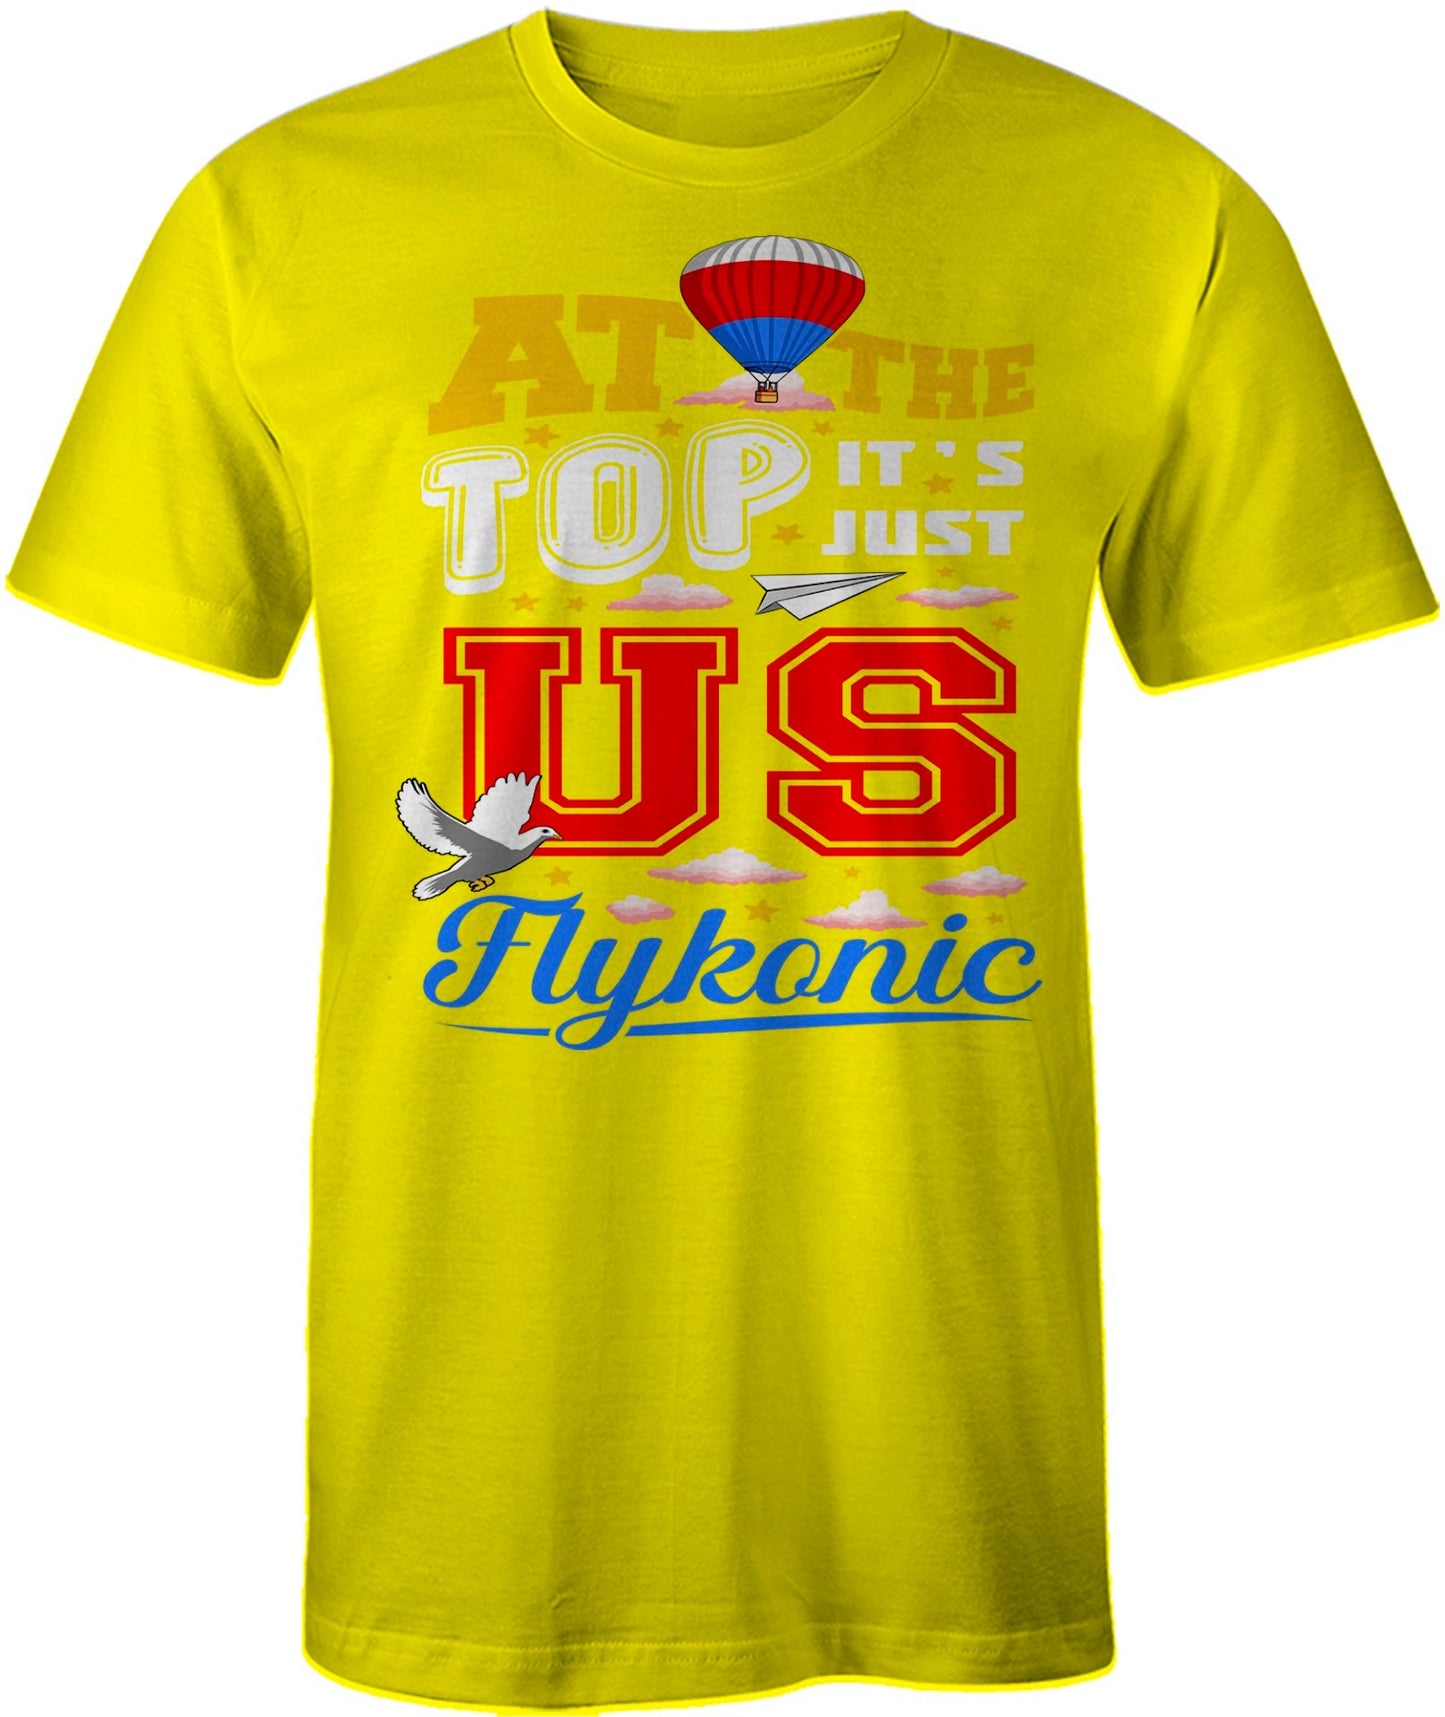 "At The Top" Tee